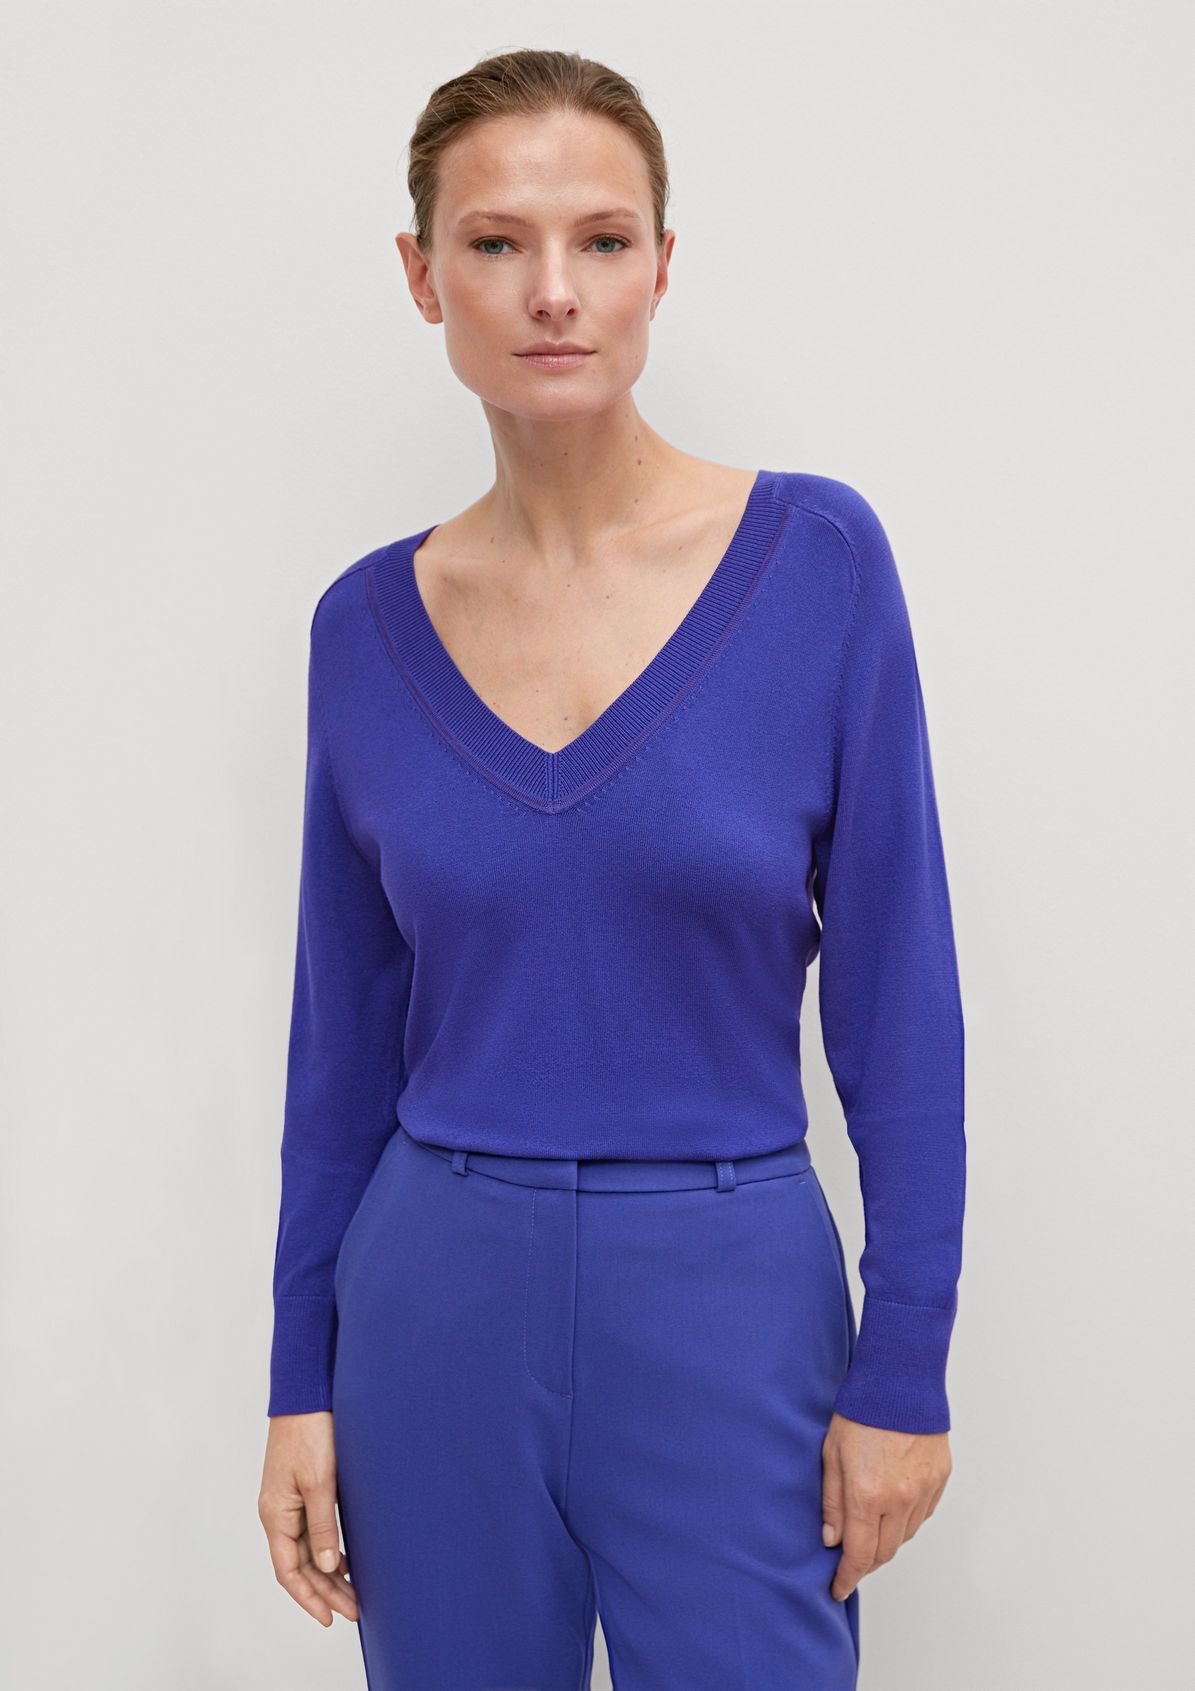 Fine knit jumper in blended viscose from comma